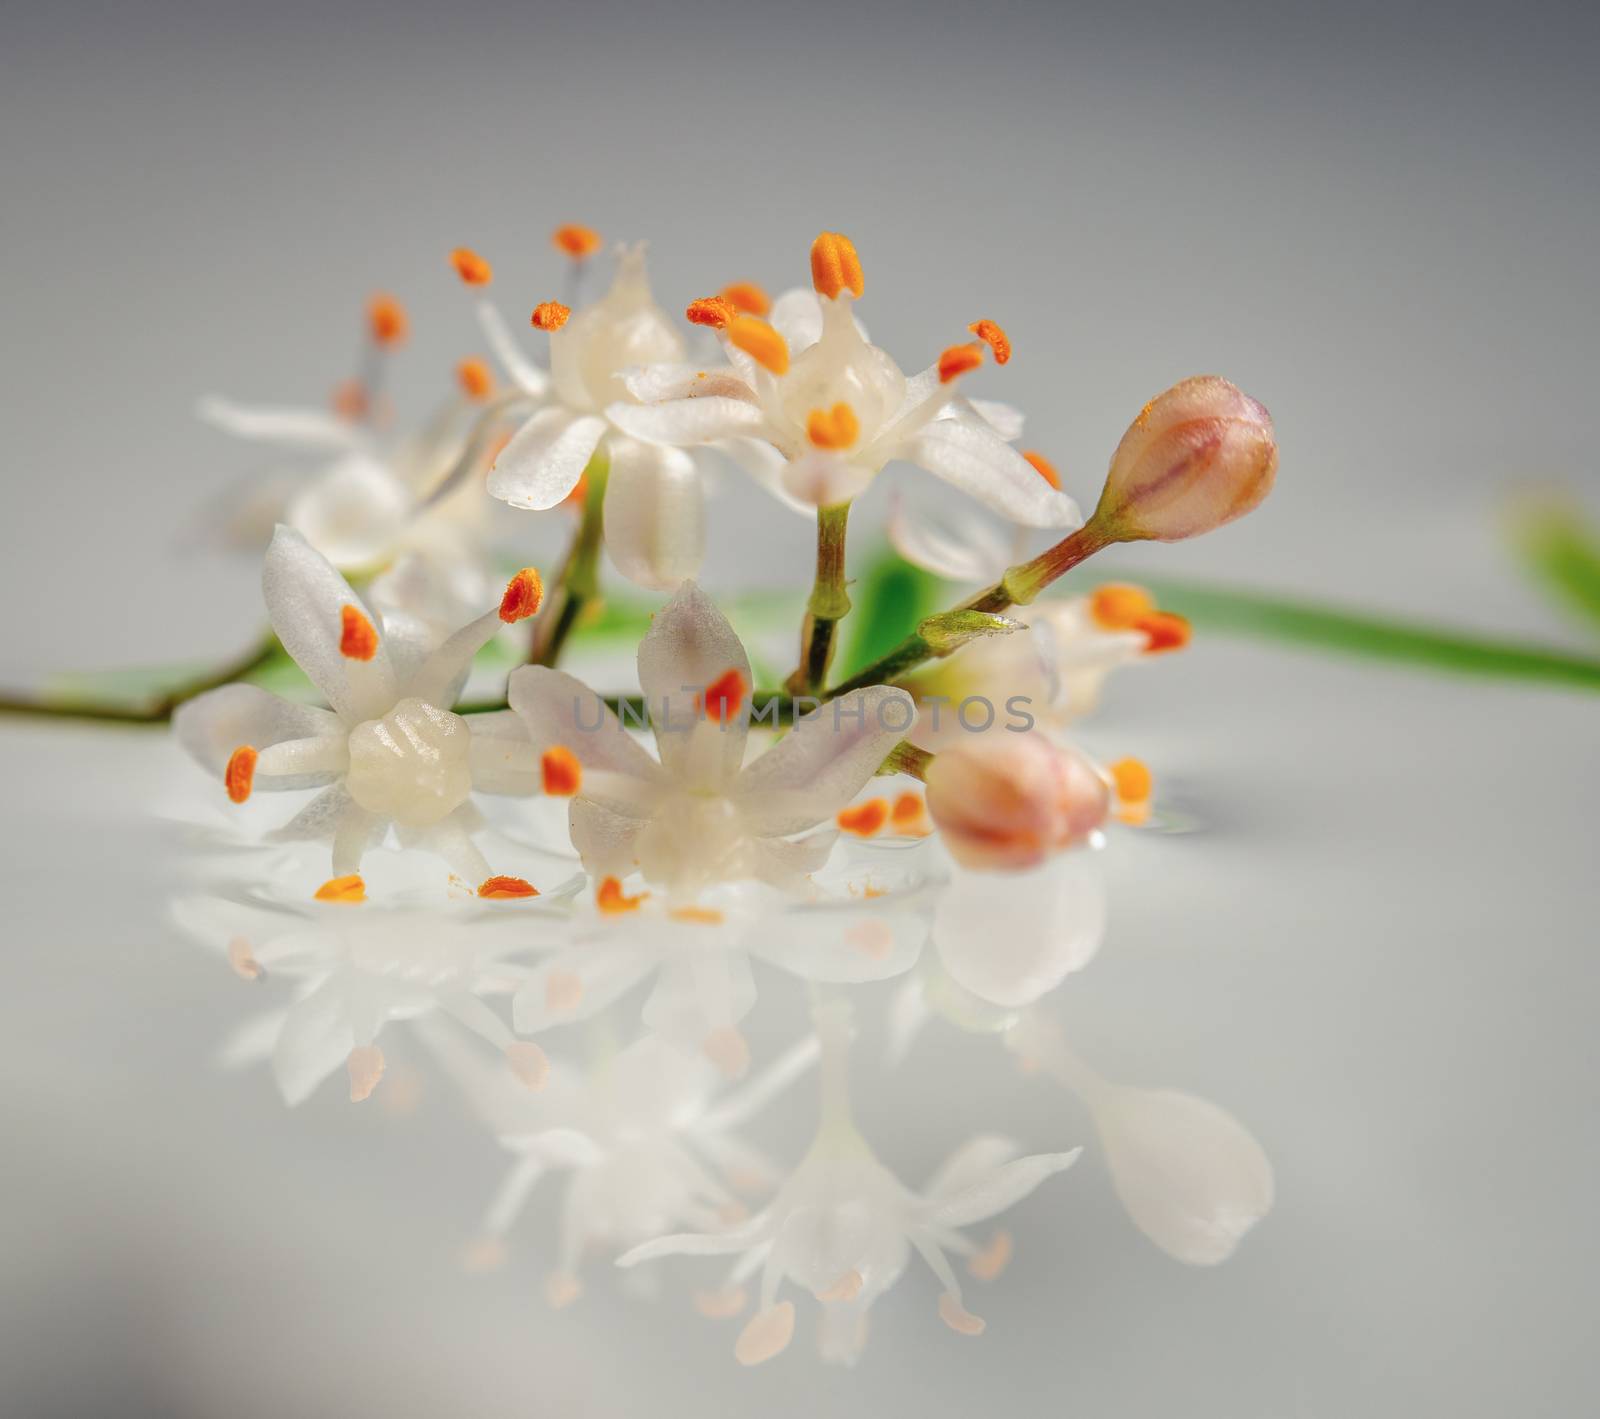 A closeup photo of a branch of white asparagus densiflorus flowers floating on water